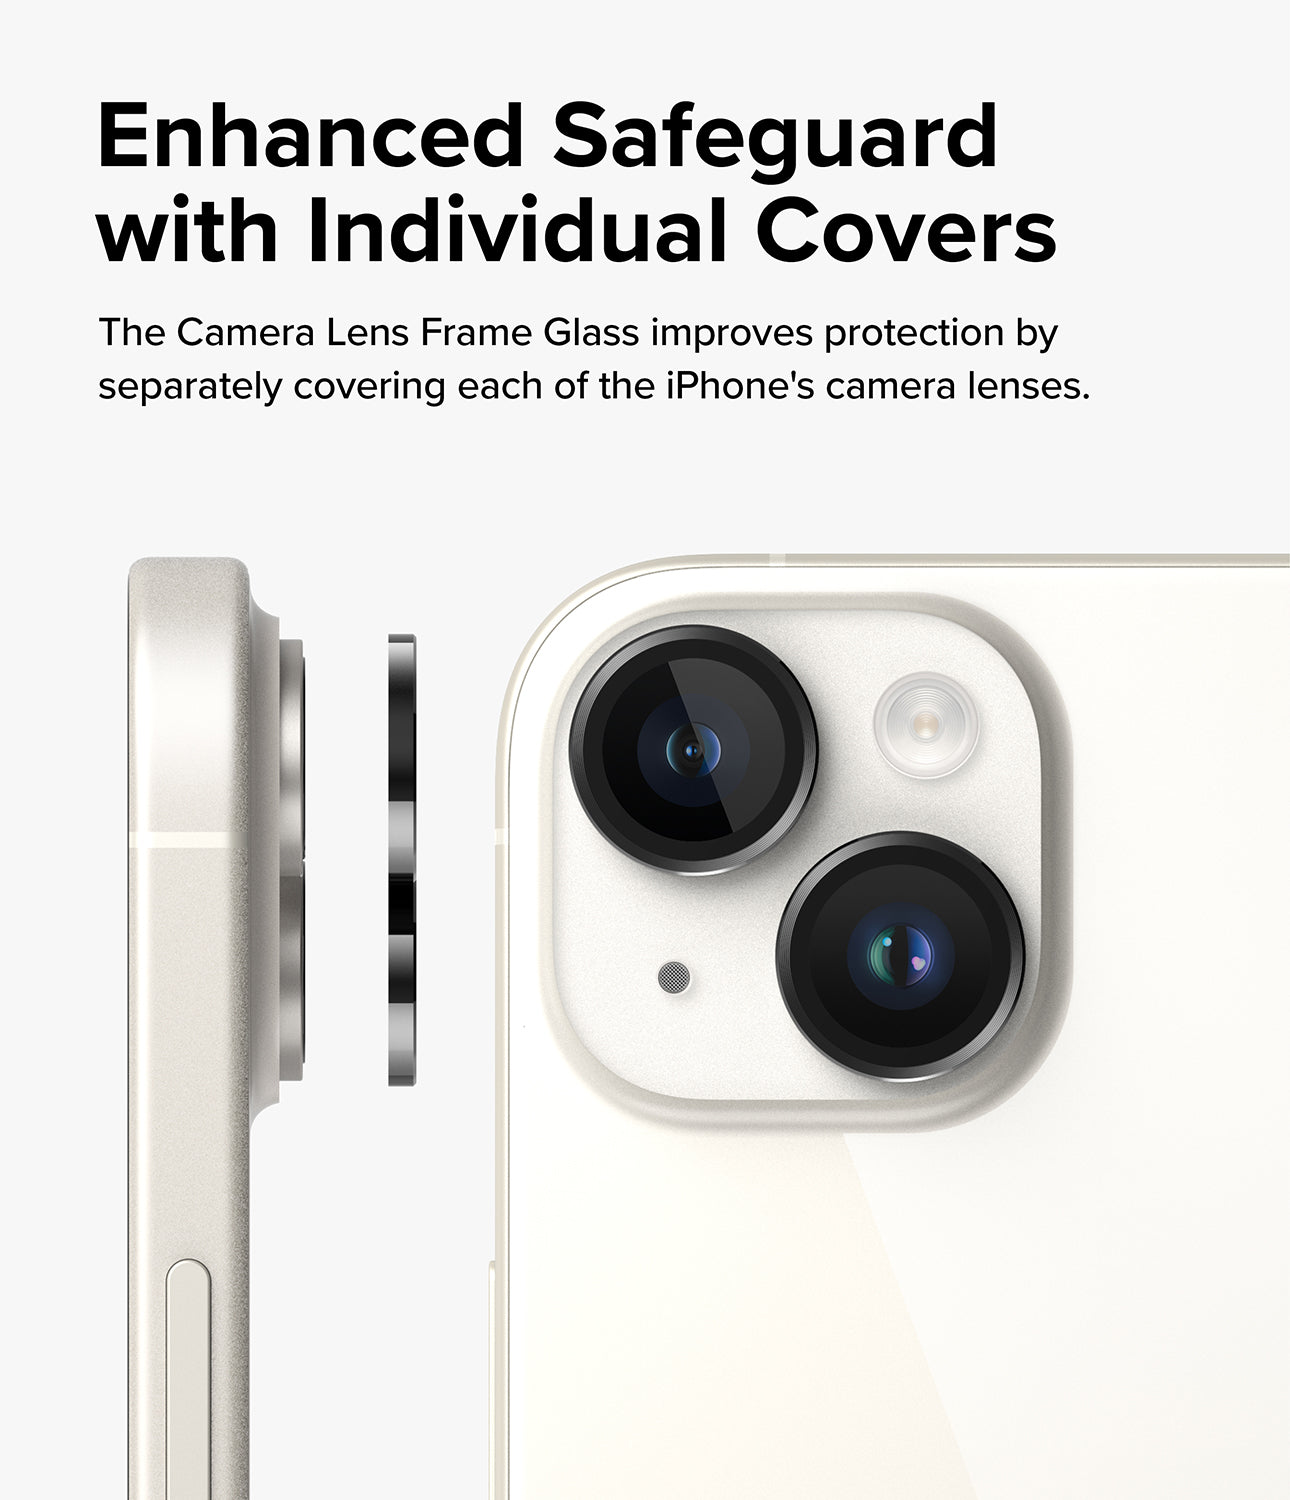 iPhone 15 Plus / 15 | Camera Lens Frame Glass - Enhanced Safeguard with Individual Covers. The Camera Lens Frame Glass improves protection by separately covering each of the iPhone's camera lenses.